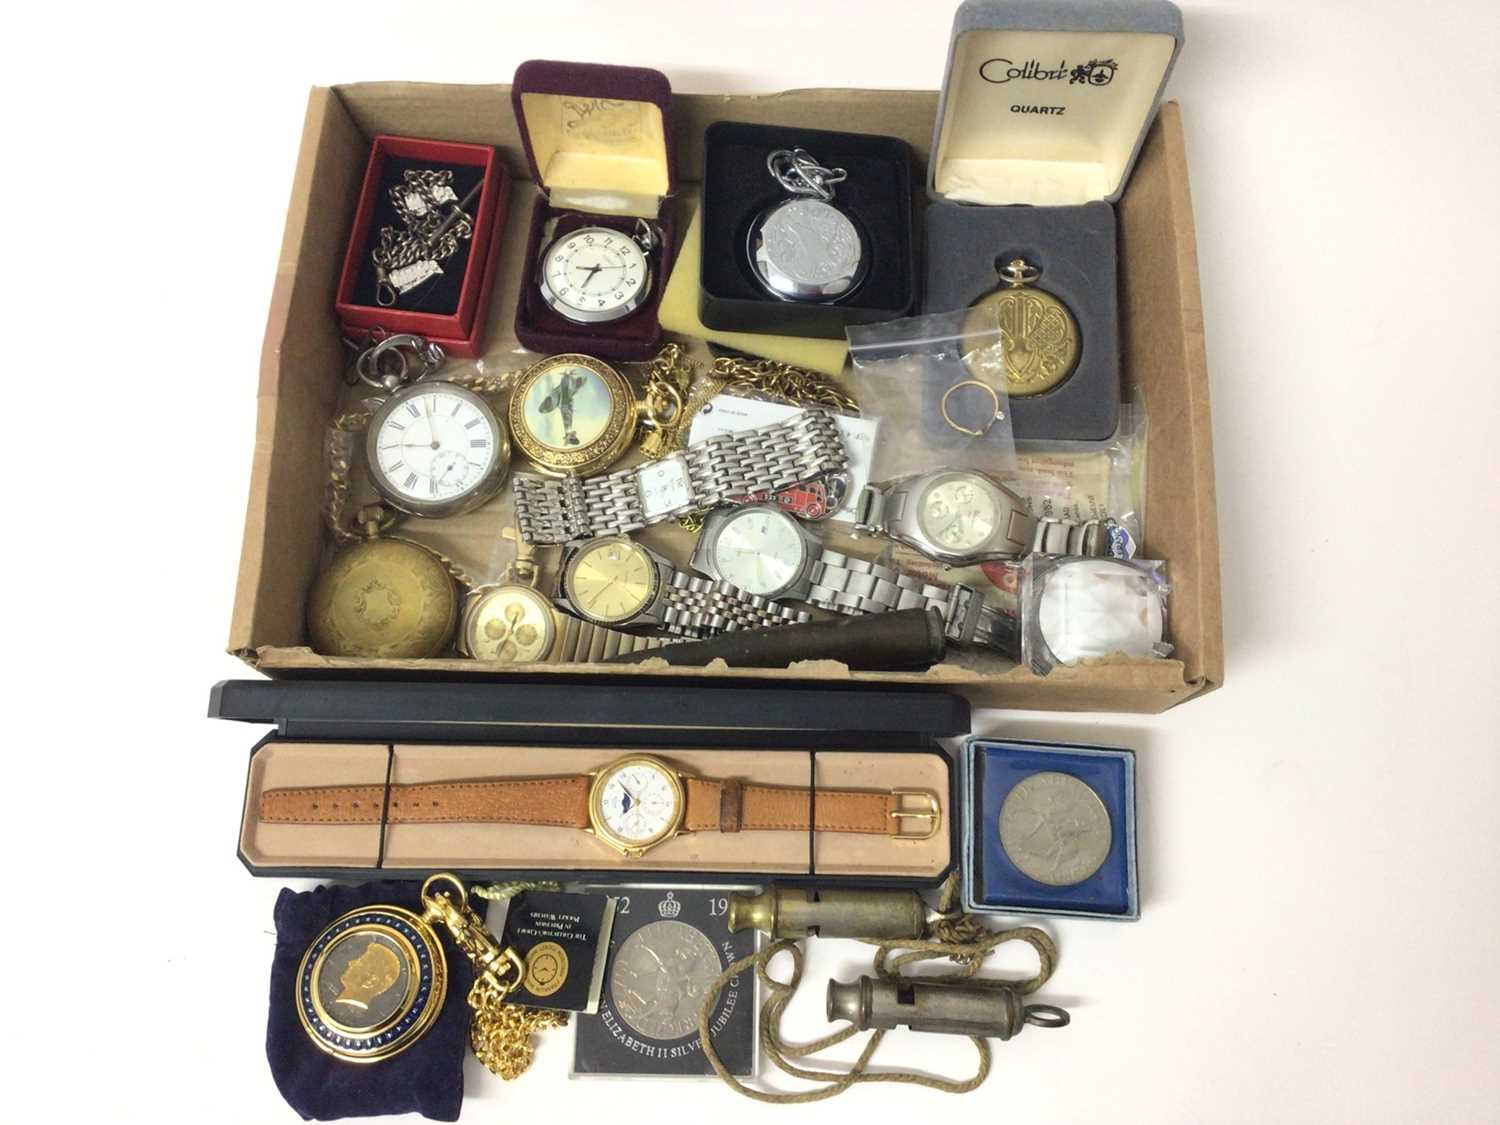 Lot 66 - Group of various watches and pocket watches, silver watch chain and an 18ct gold diamond single stone ring (diamond loose)